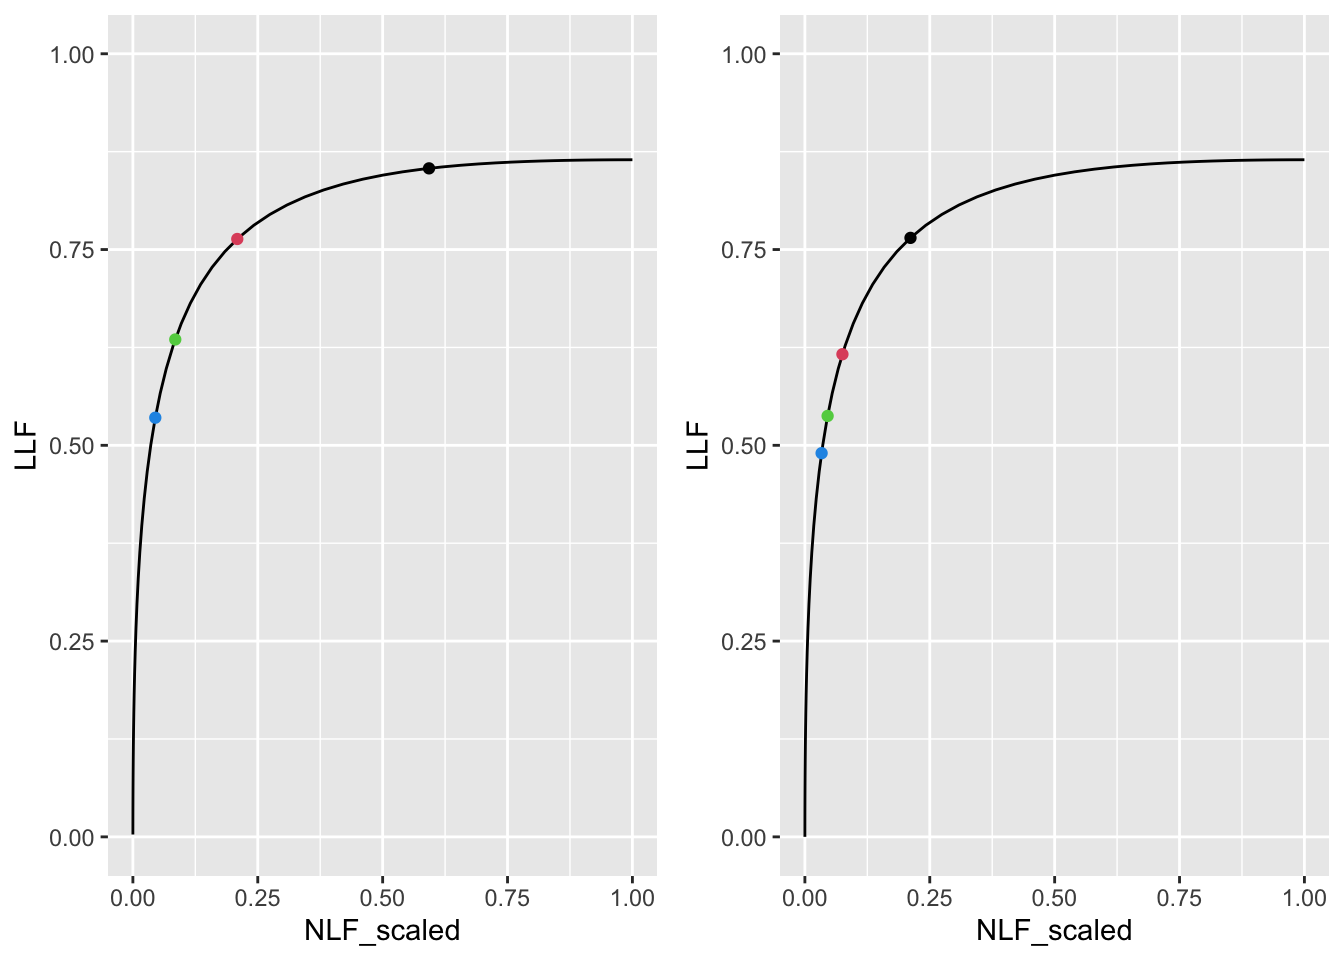 Left panel: maximized wAFROC AUC was used to find optimal $\zeta_1$. Right panel: maximized Youden-index was used to find optimal $\zeta_1$. Dot colors: black means $\lambda = 1$, red means $\lambda = 5$, green means $\lambda = 10$ and blue means $\lambda = 15$.